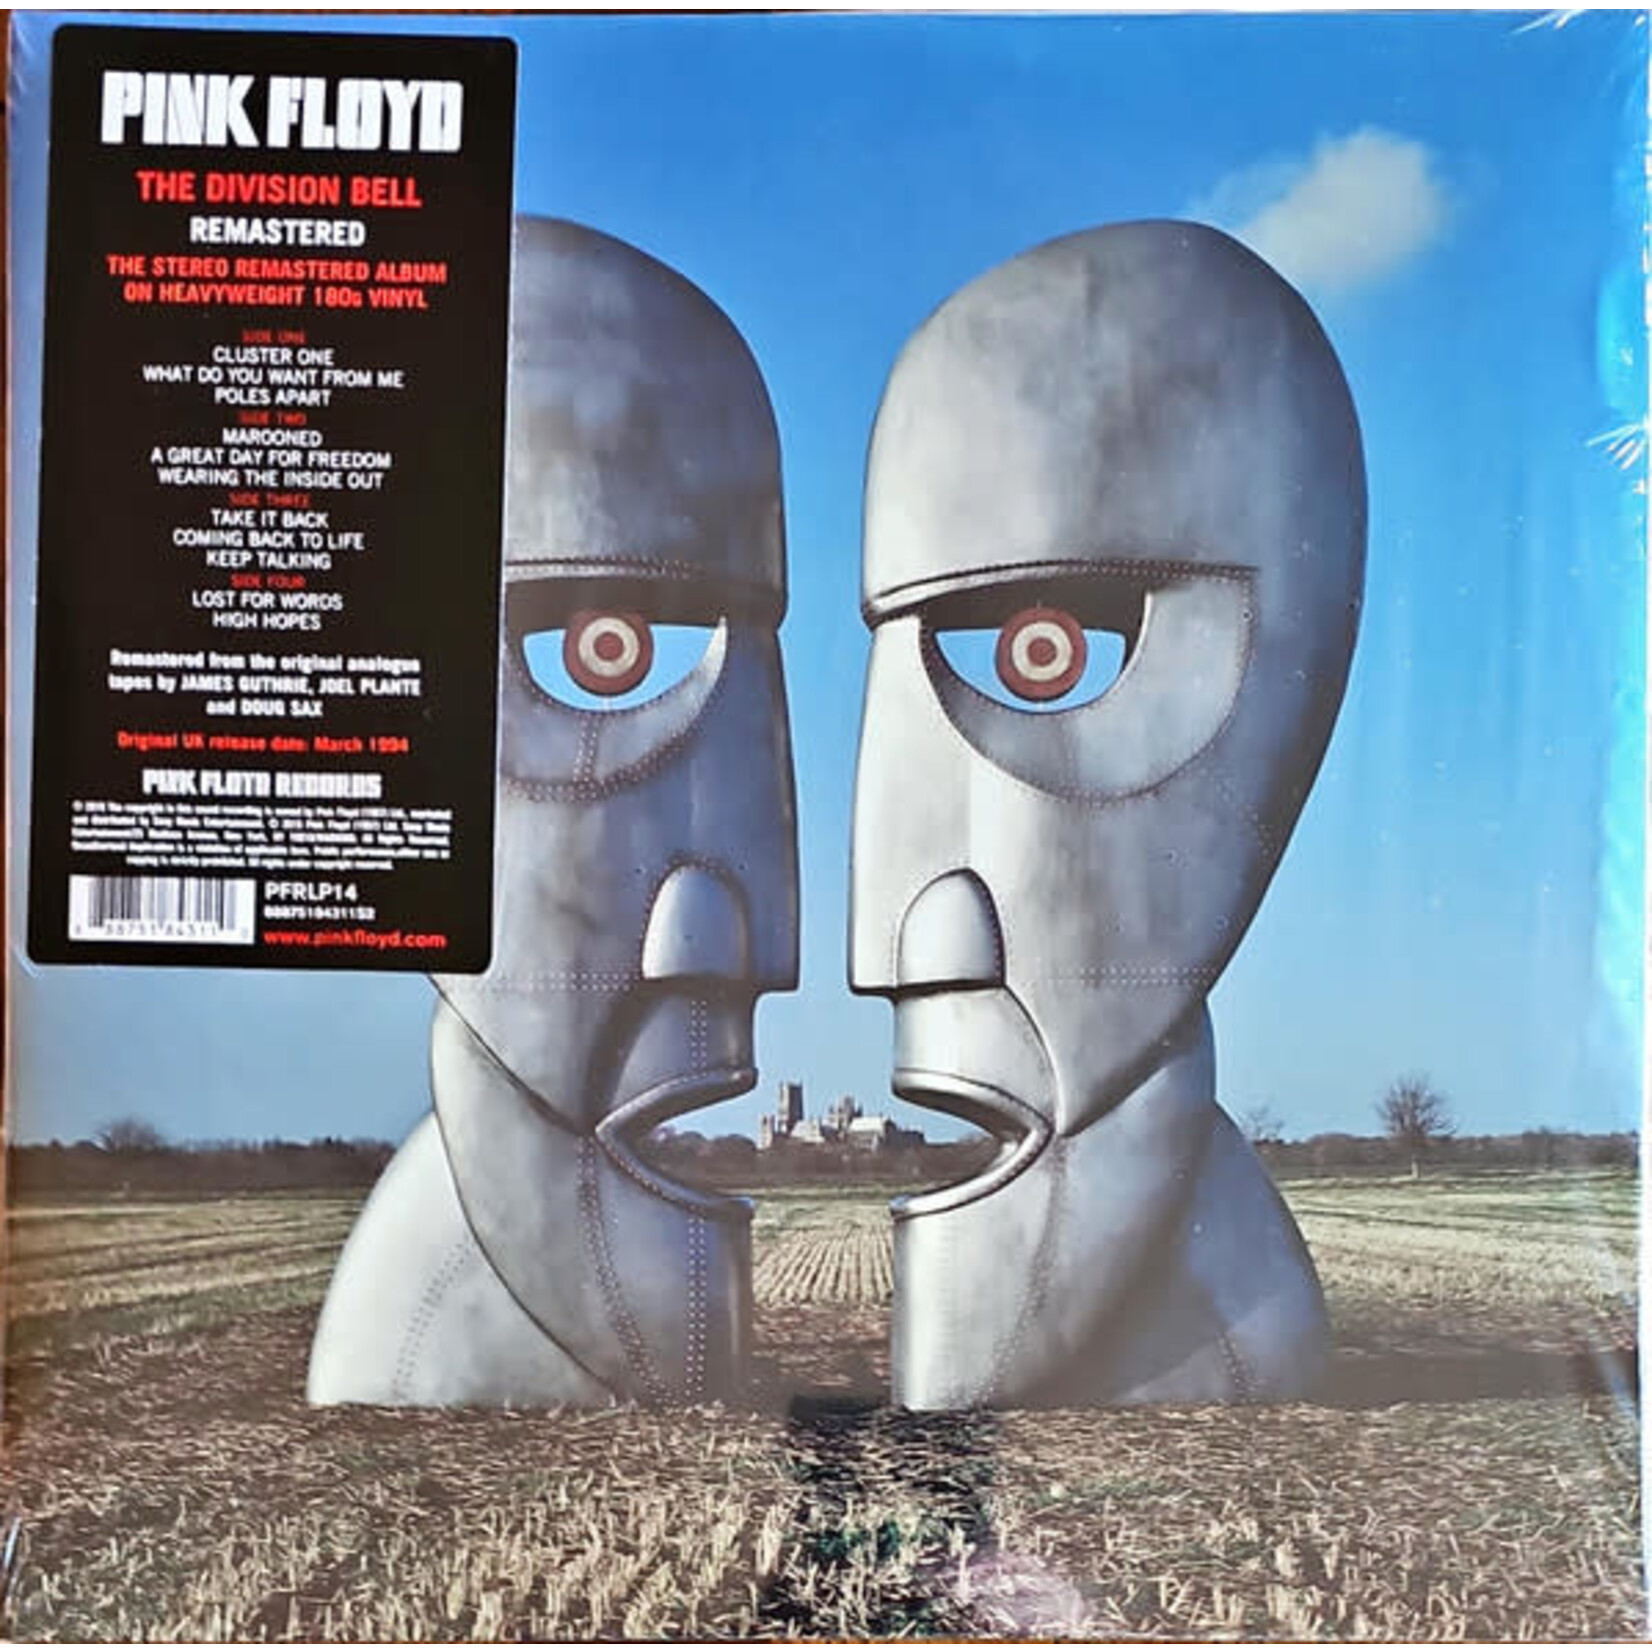 Pink Floyd Pink Floyd – The Division Bell (New, 2LP, Pink Floyd Records – PFRLP14)